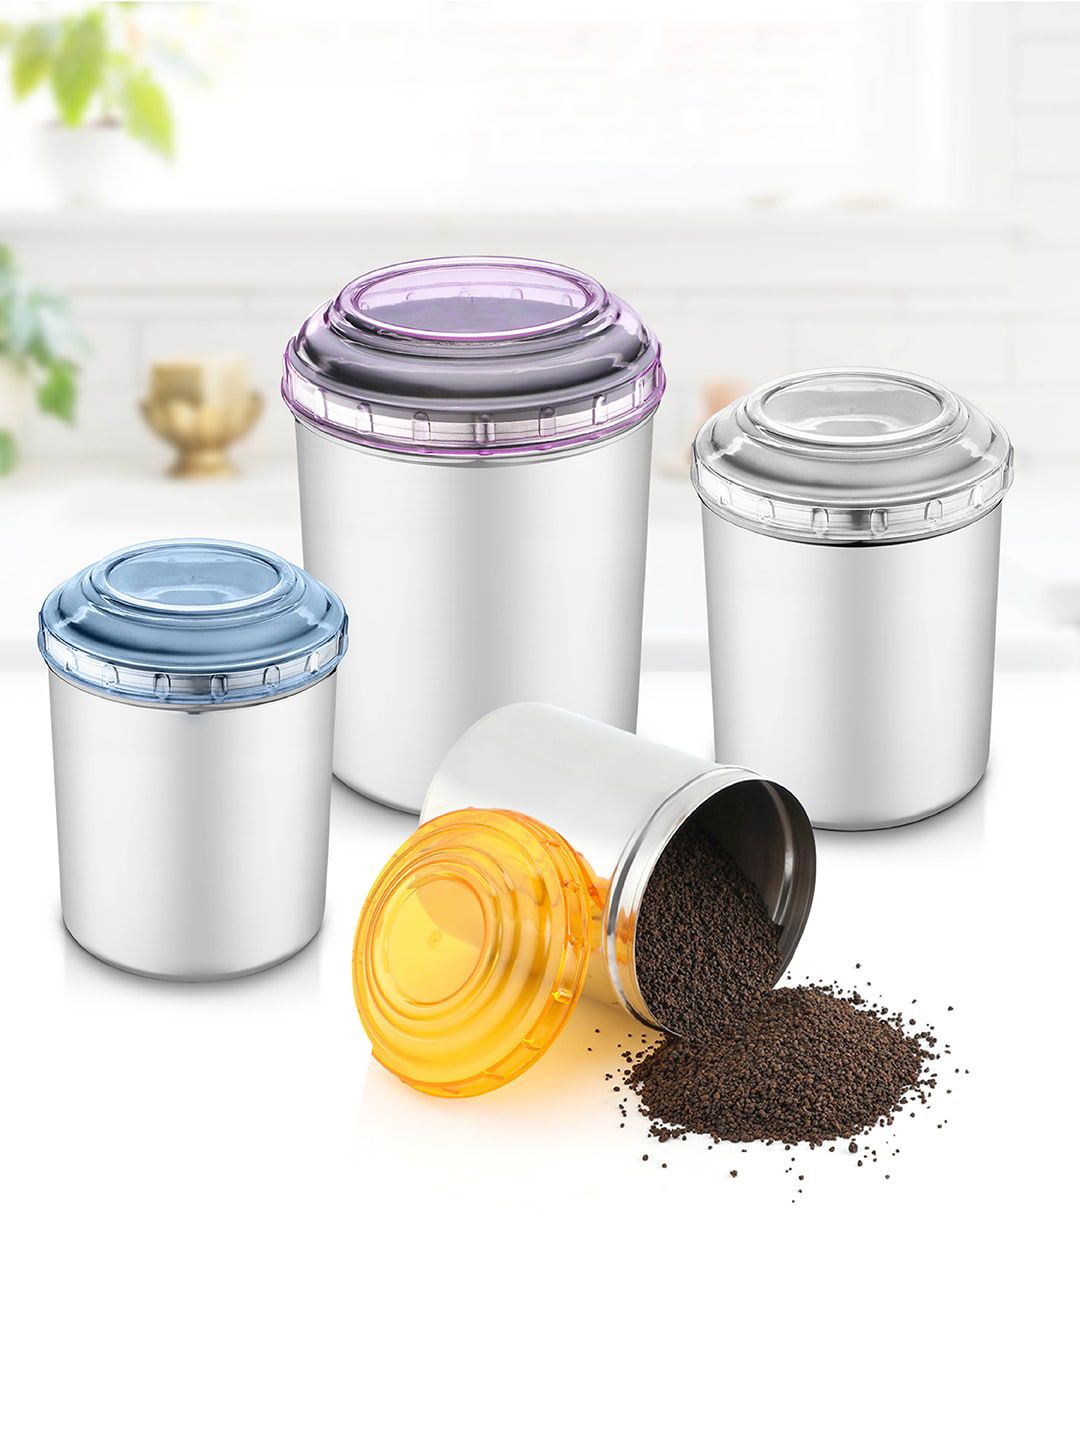 Jensons Set Of 12 Silver-Toned Solid Stainless Steel Canisters Price in India